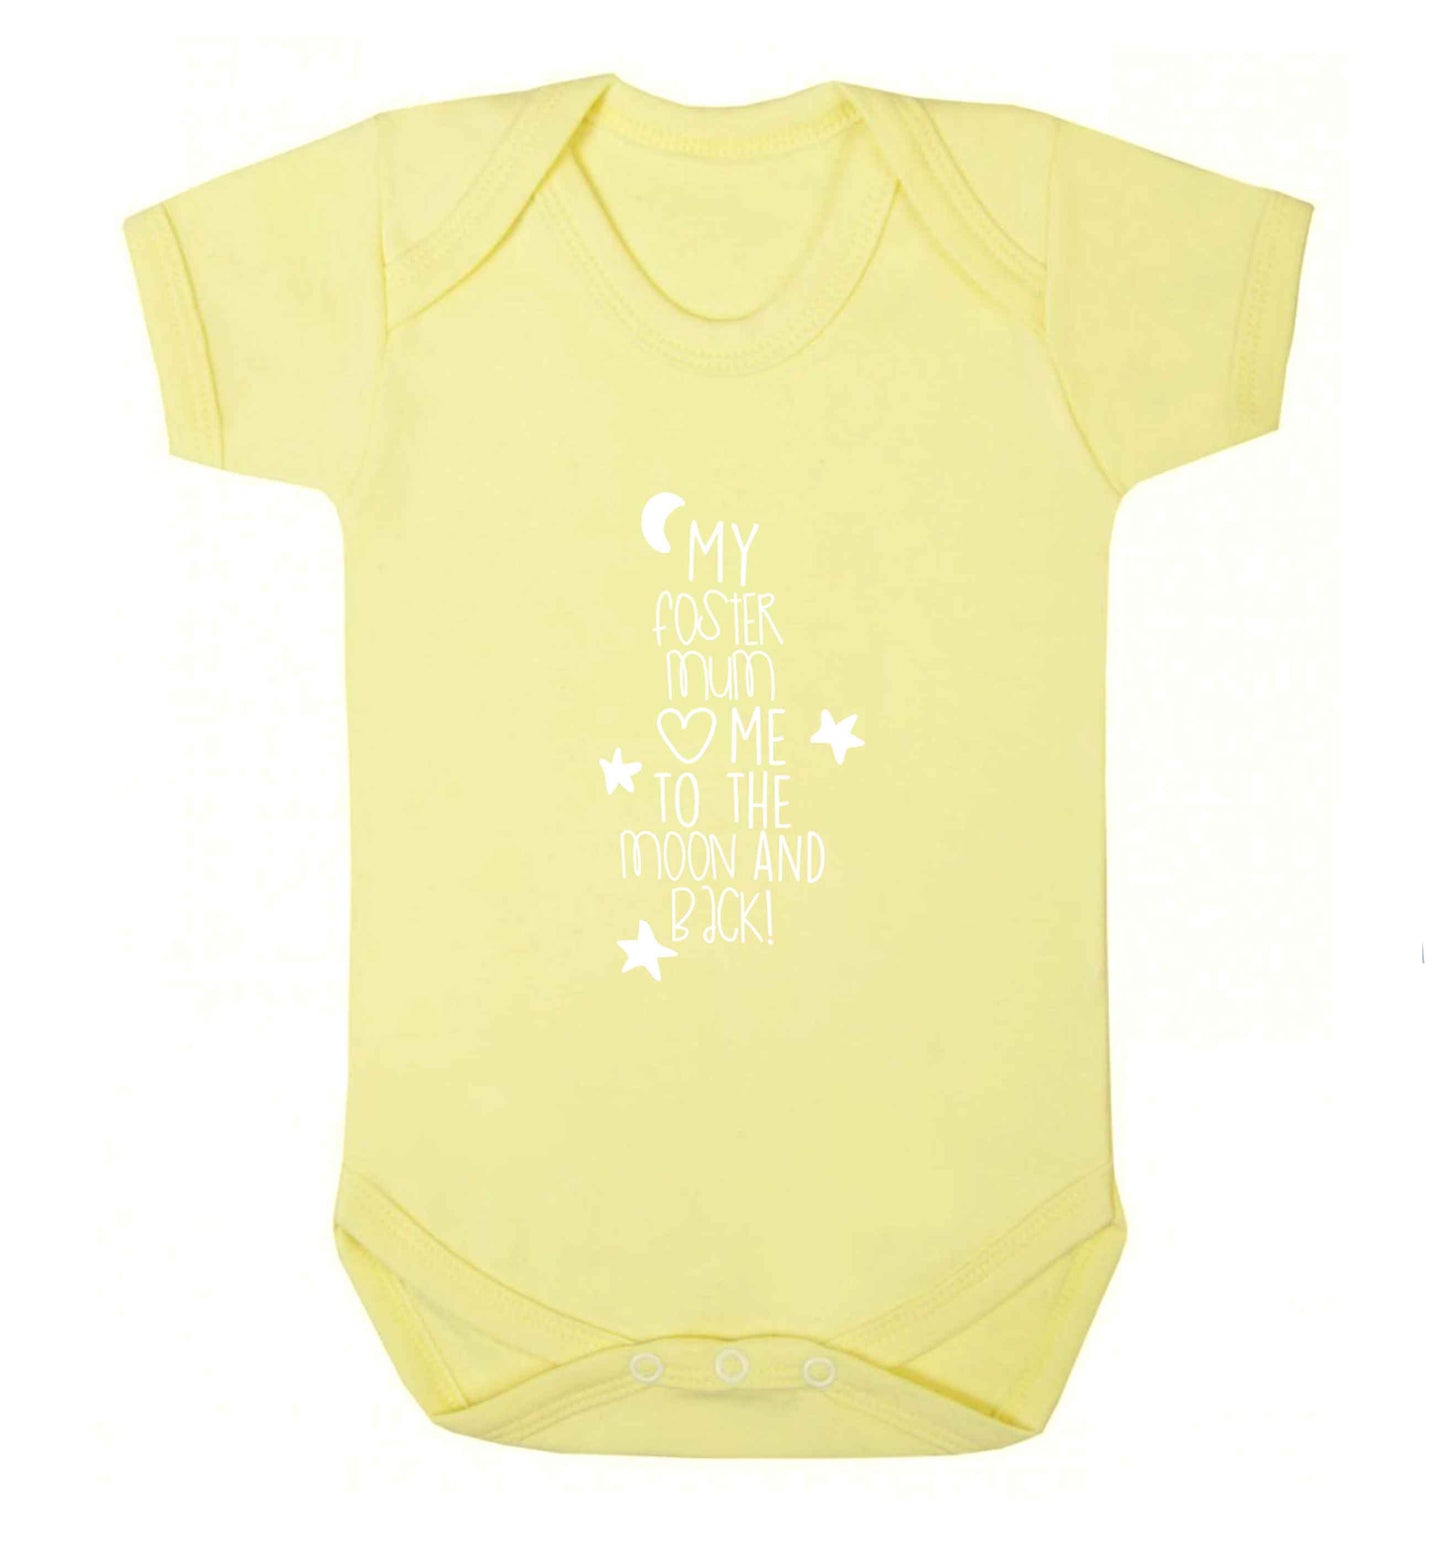 My foster mum loves me to the moon and back baby vest pale yellow 18-24 months